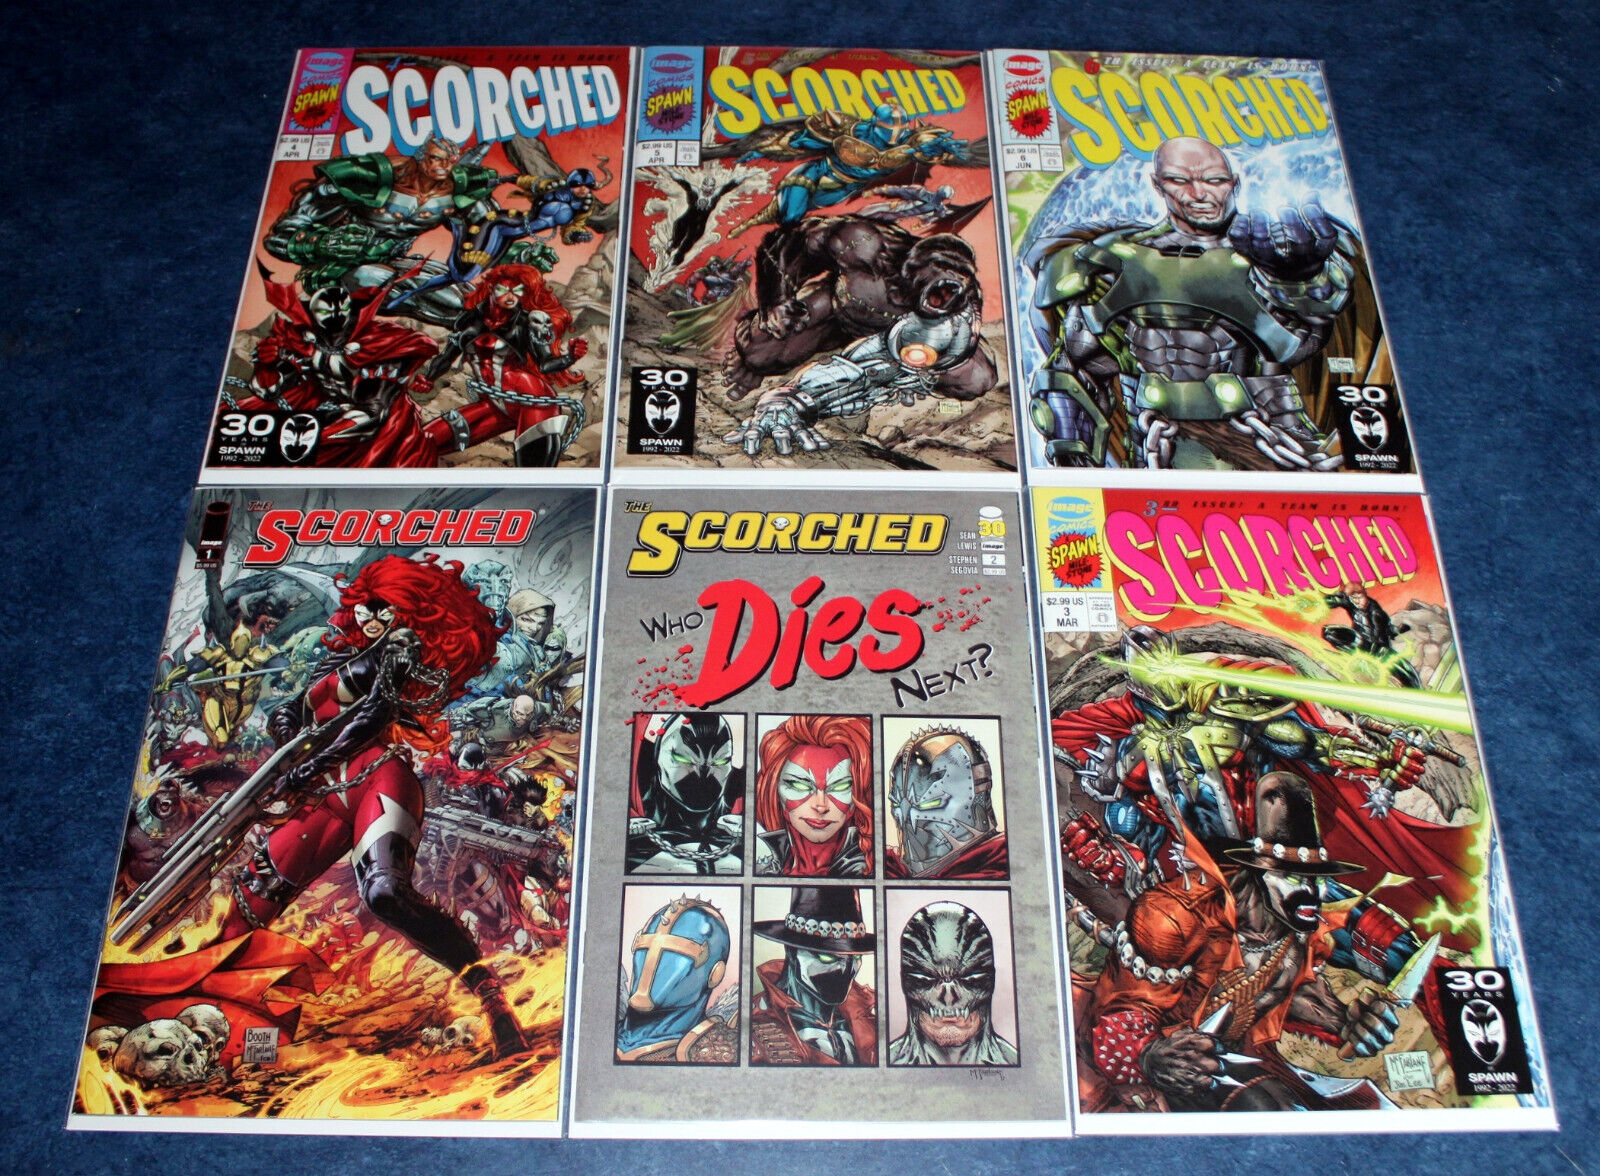 SPAWN the SCORCHED #1 2 3 4 5 6 1st print VARIANT set ToDD McFARLANE iMAGE NM